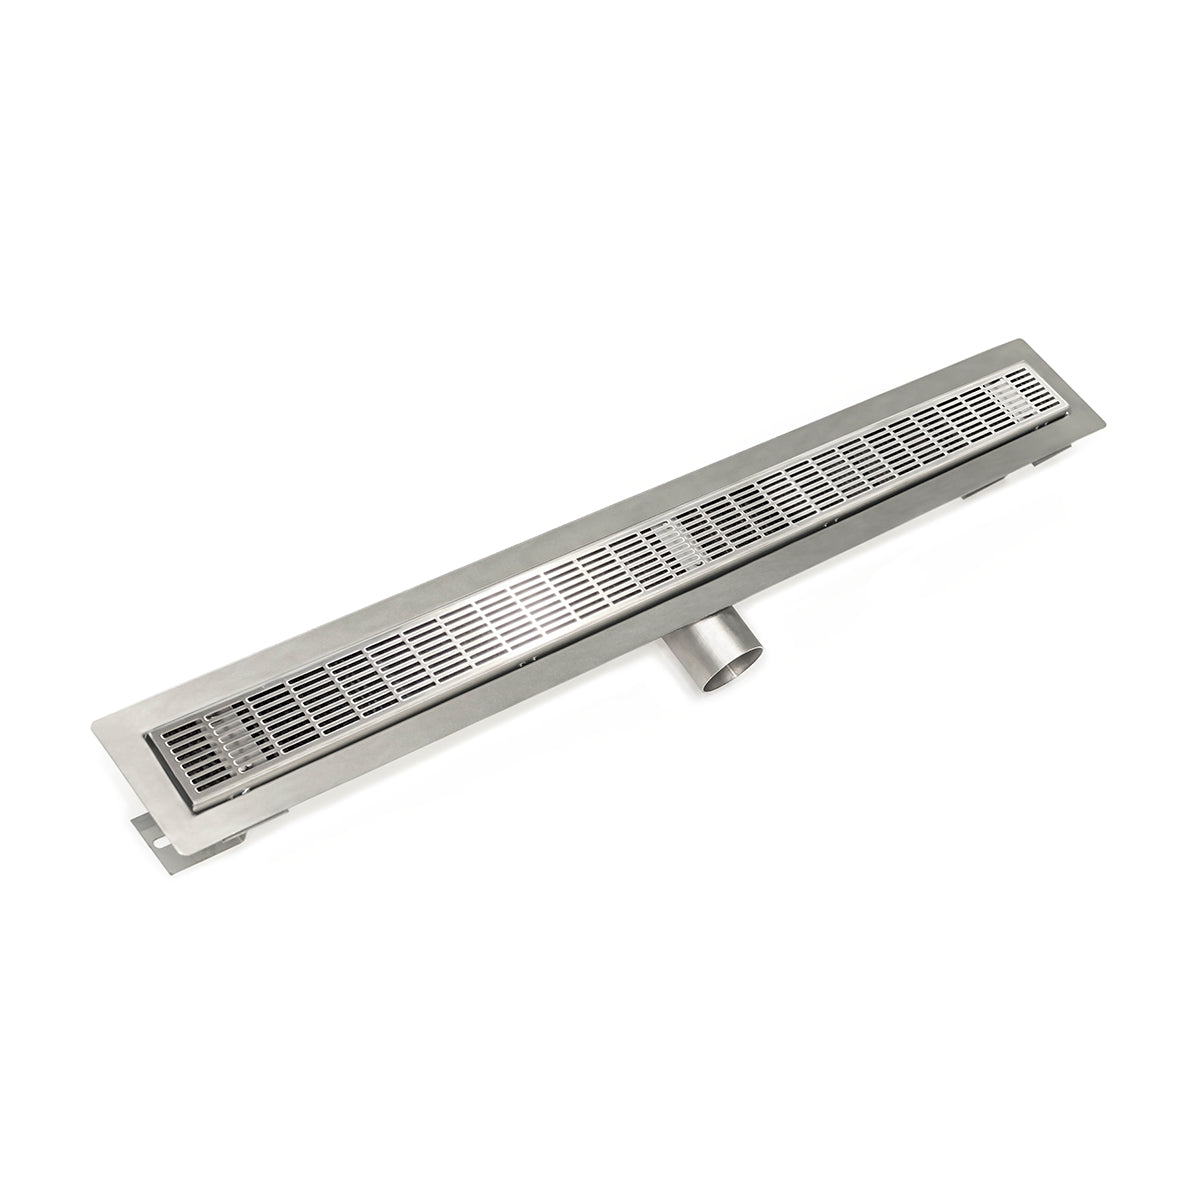 Infinity Drain 32" FT Series Side Outlet Linear Drain Kit with 2 1/2" Perforated Slotted Grate